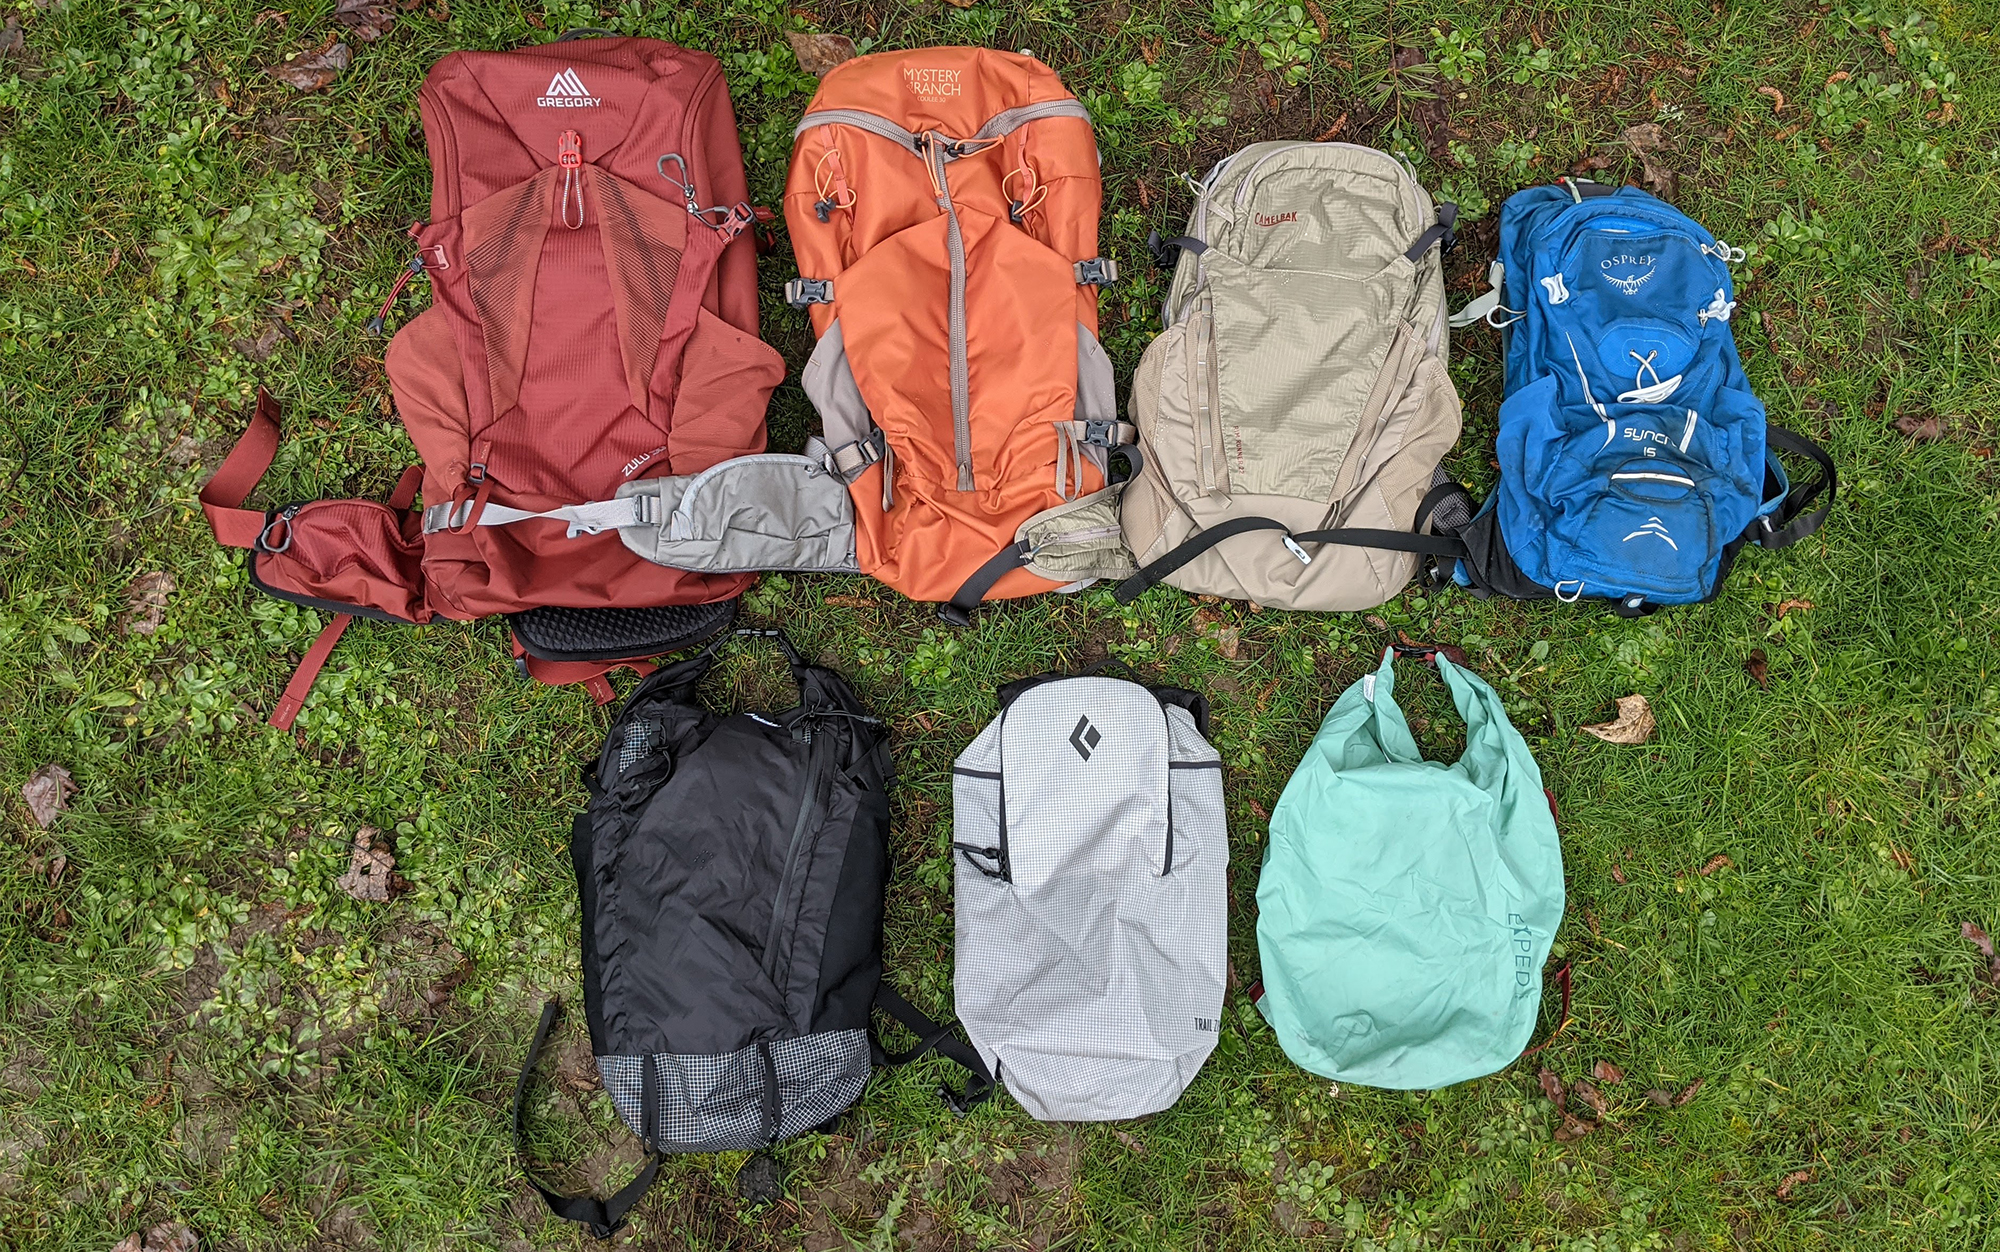 The best hiking daypacks sit in the grass.